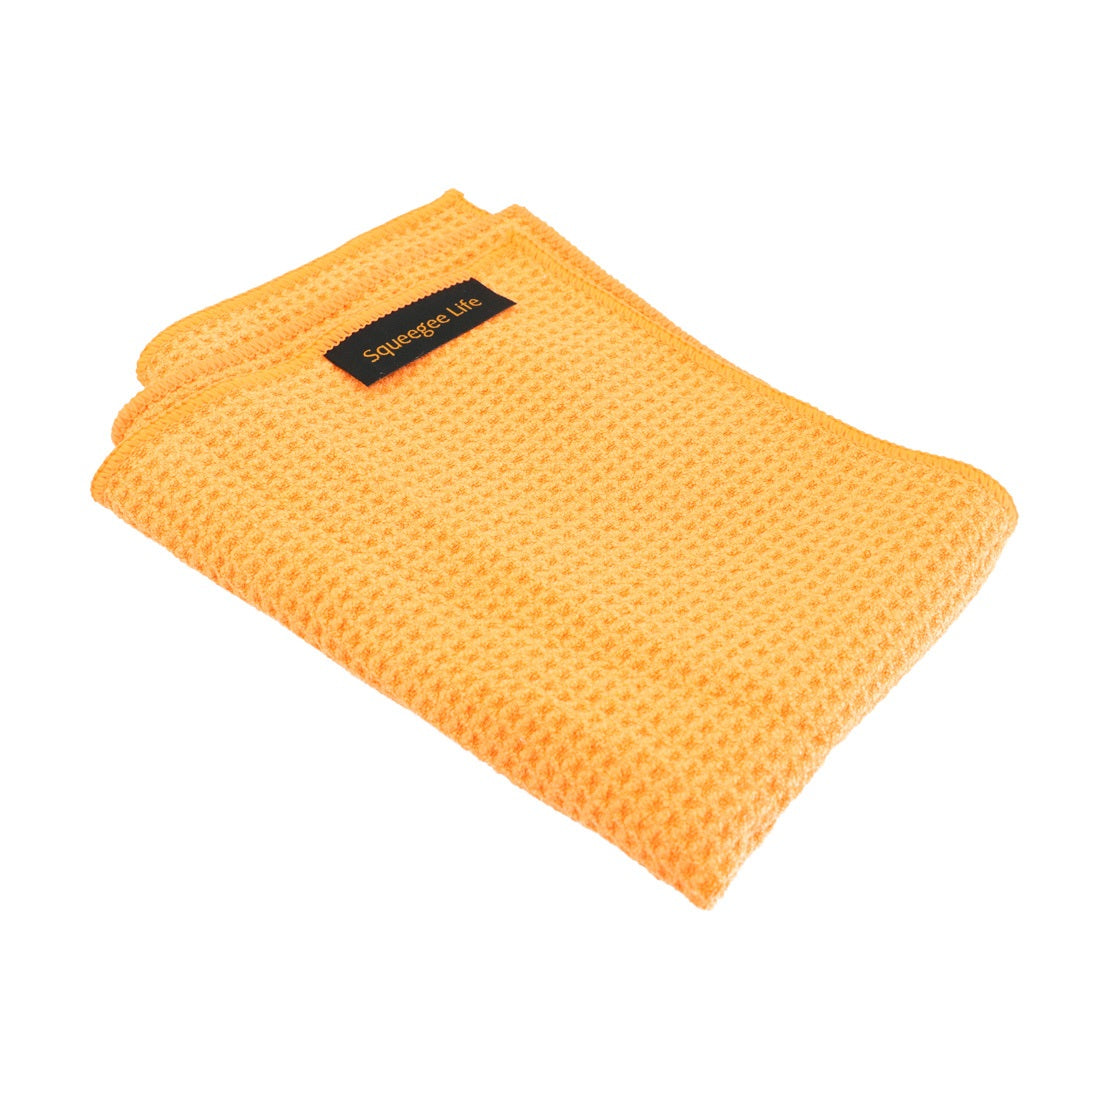 DI Microfiber Waffle Weave Glass Cleaning Towel Yellow - 16 x 16 -  Detailed Image